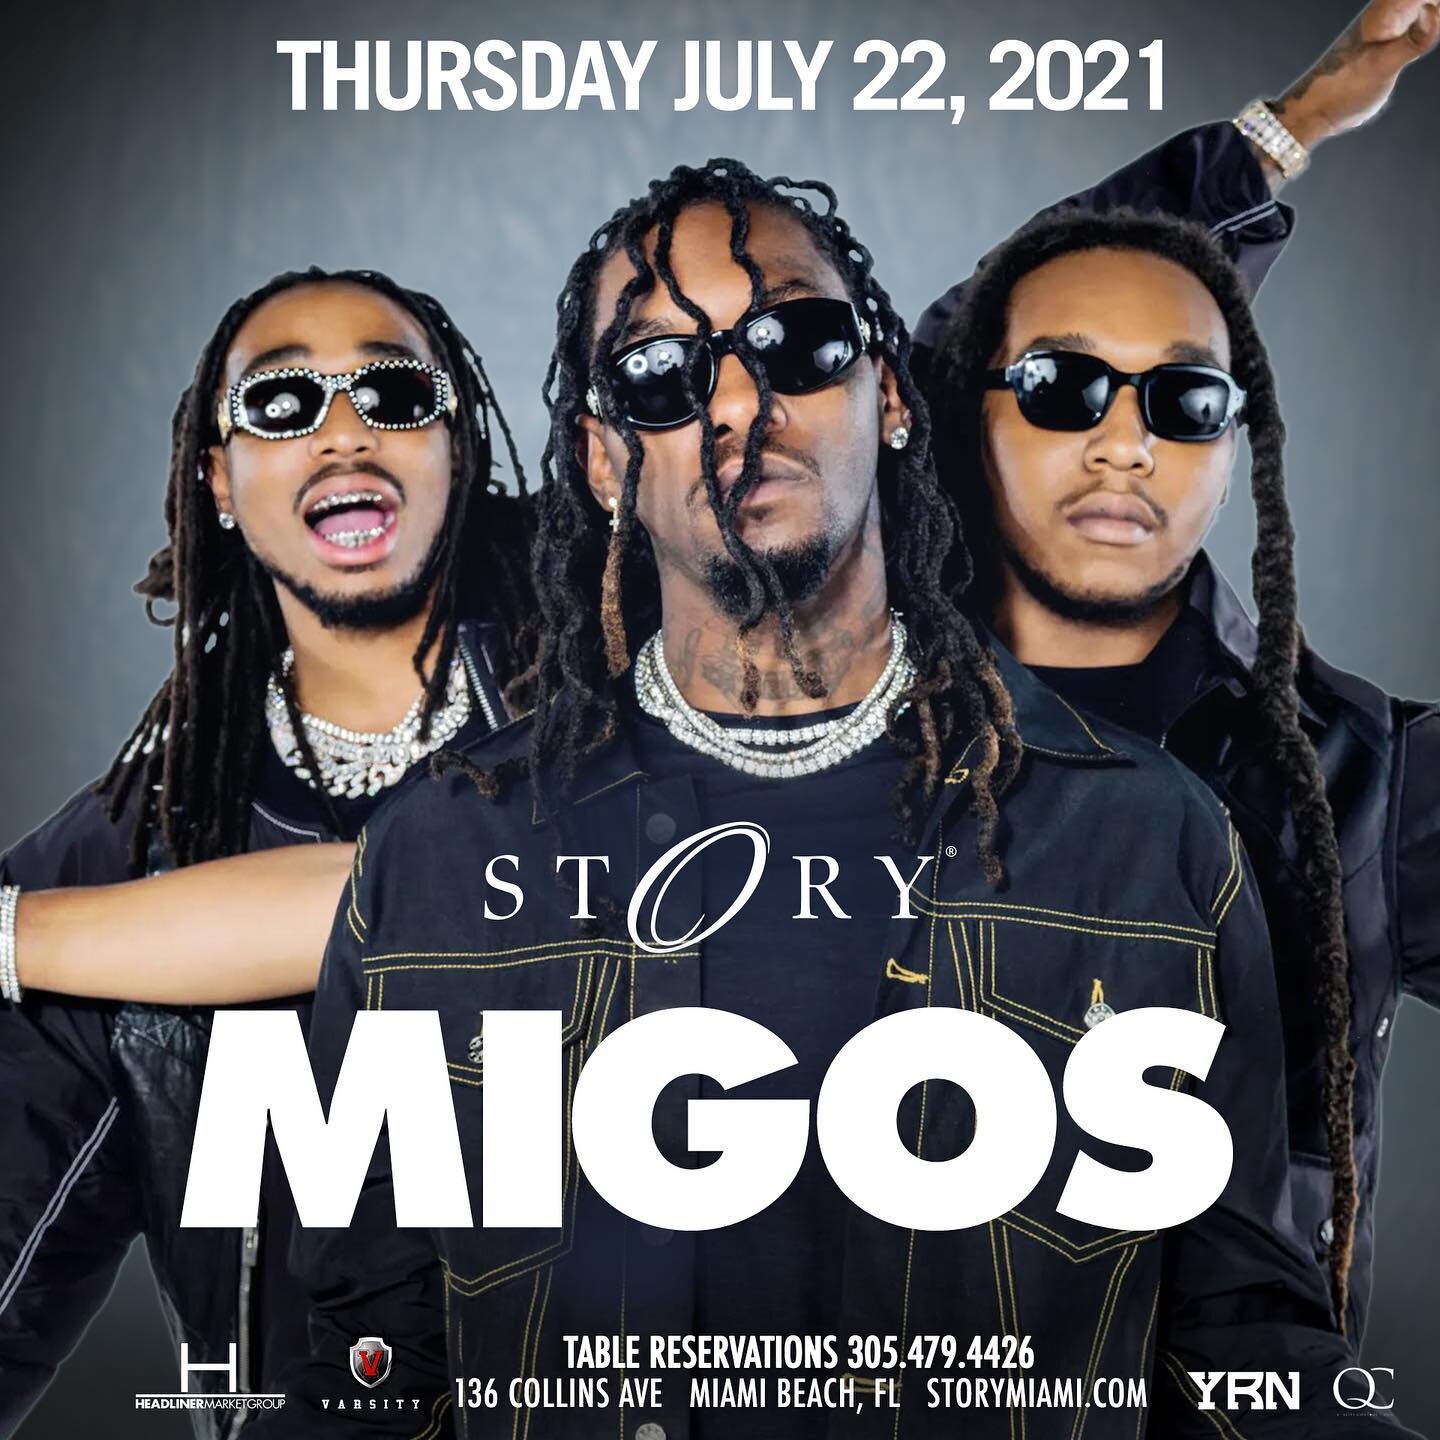 Do it for the CULTURE 🔥 @migos THIS THURSDAY July 22nd!